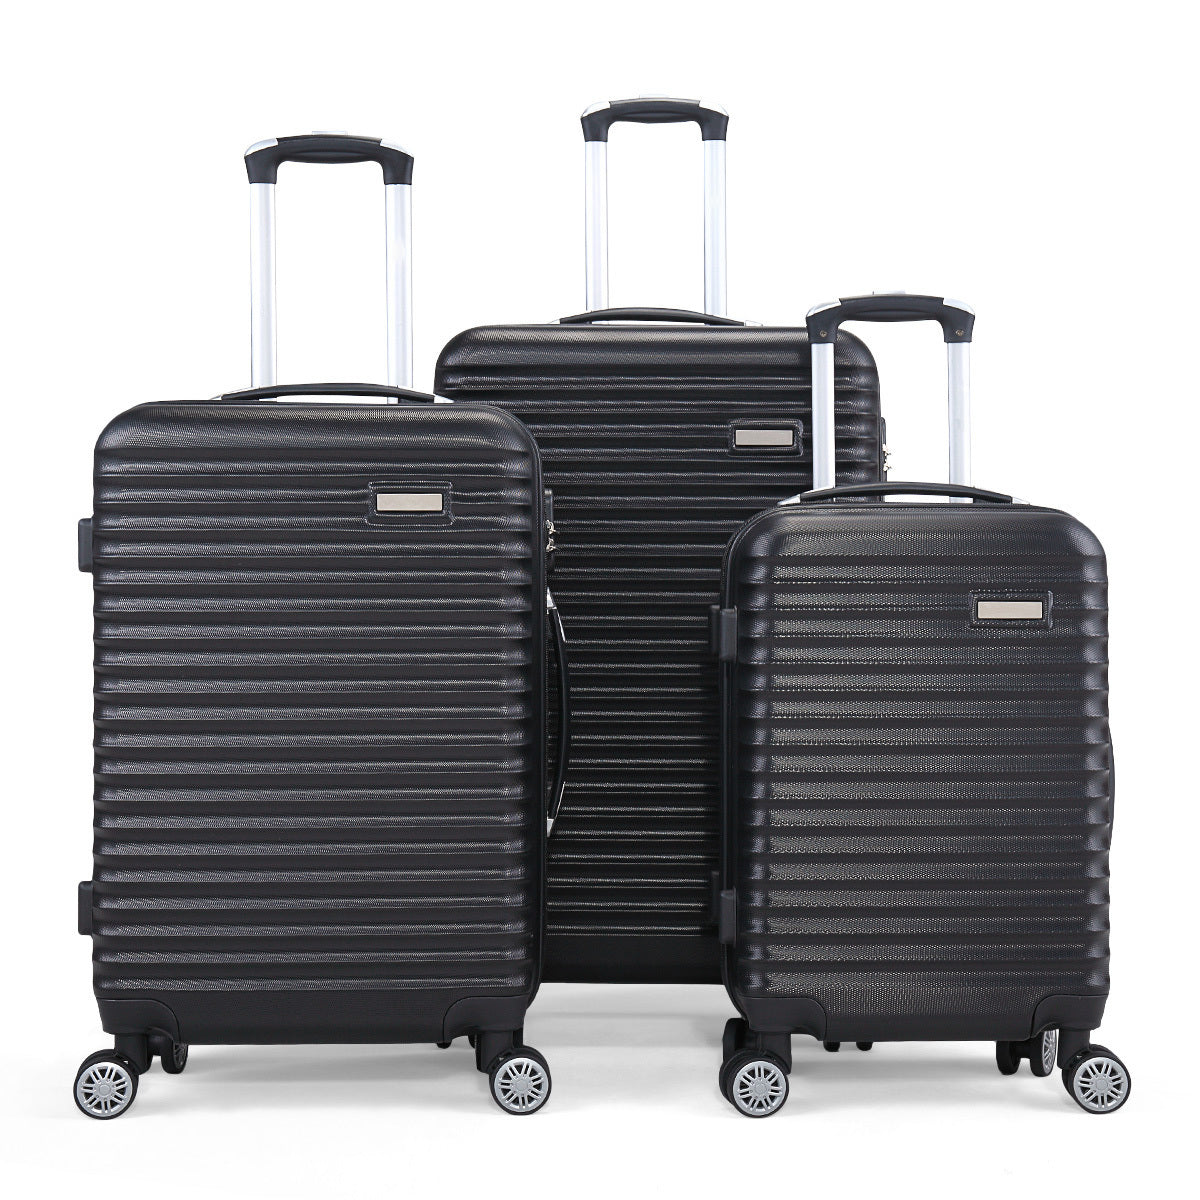 Set of 3 Trolley Suitcases Travel Luggage Storage black-abs